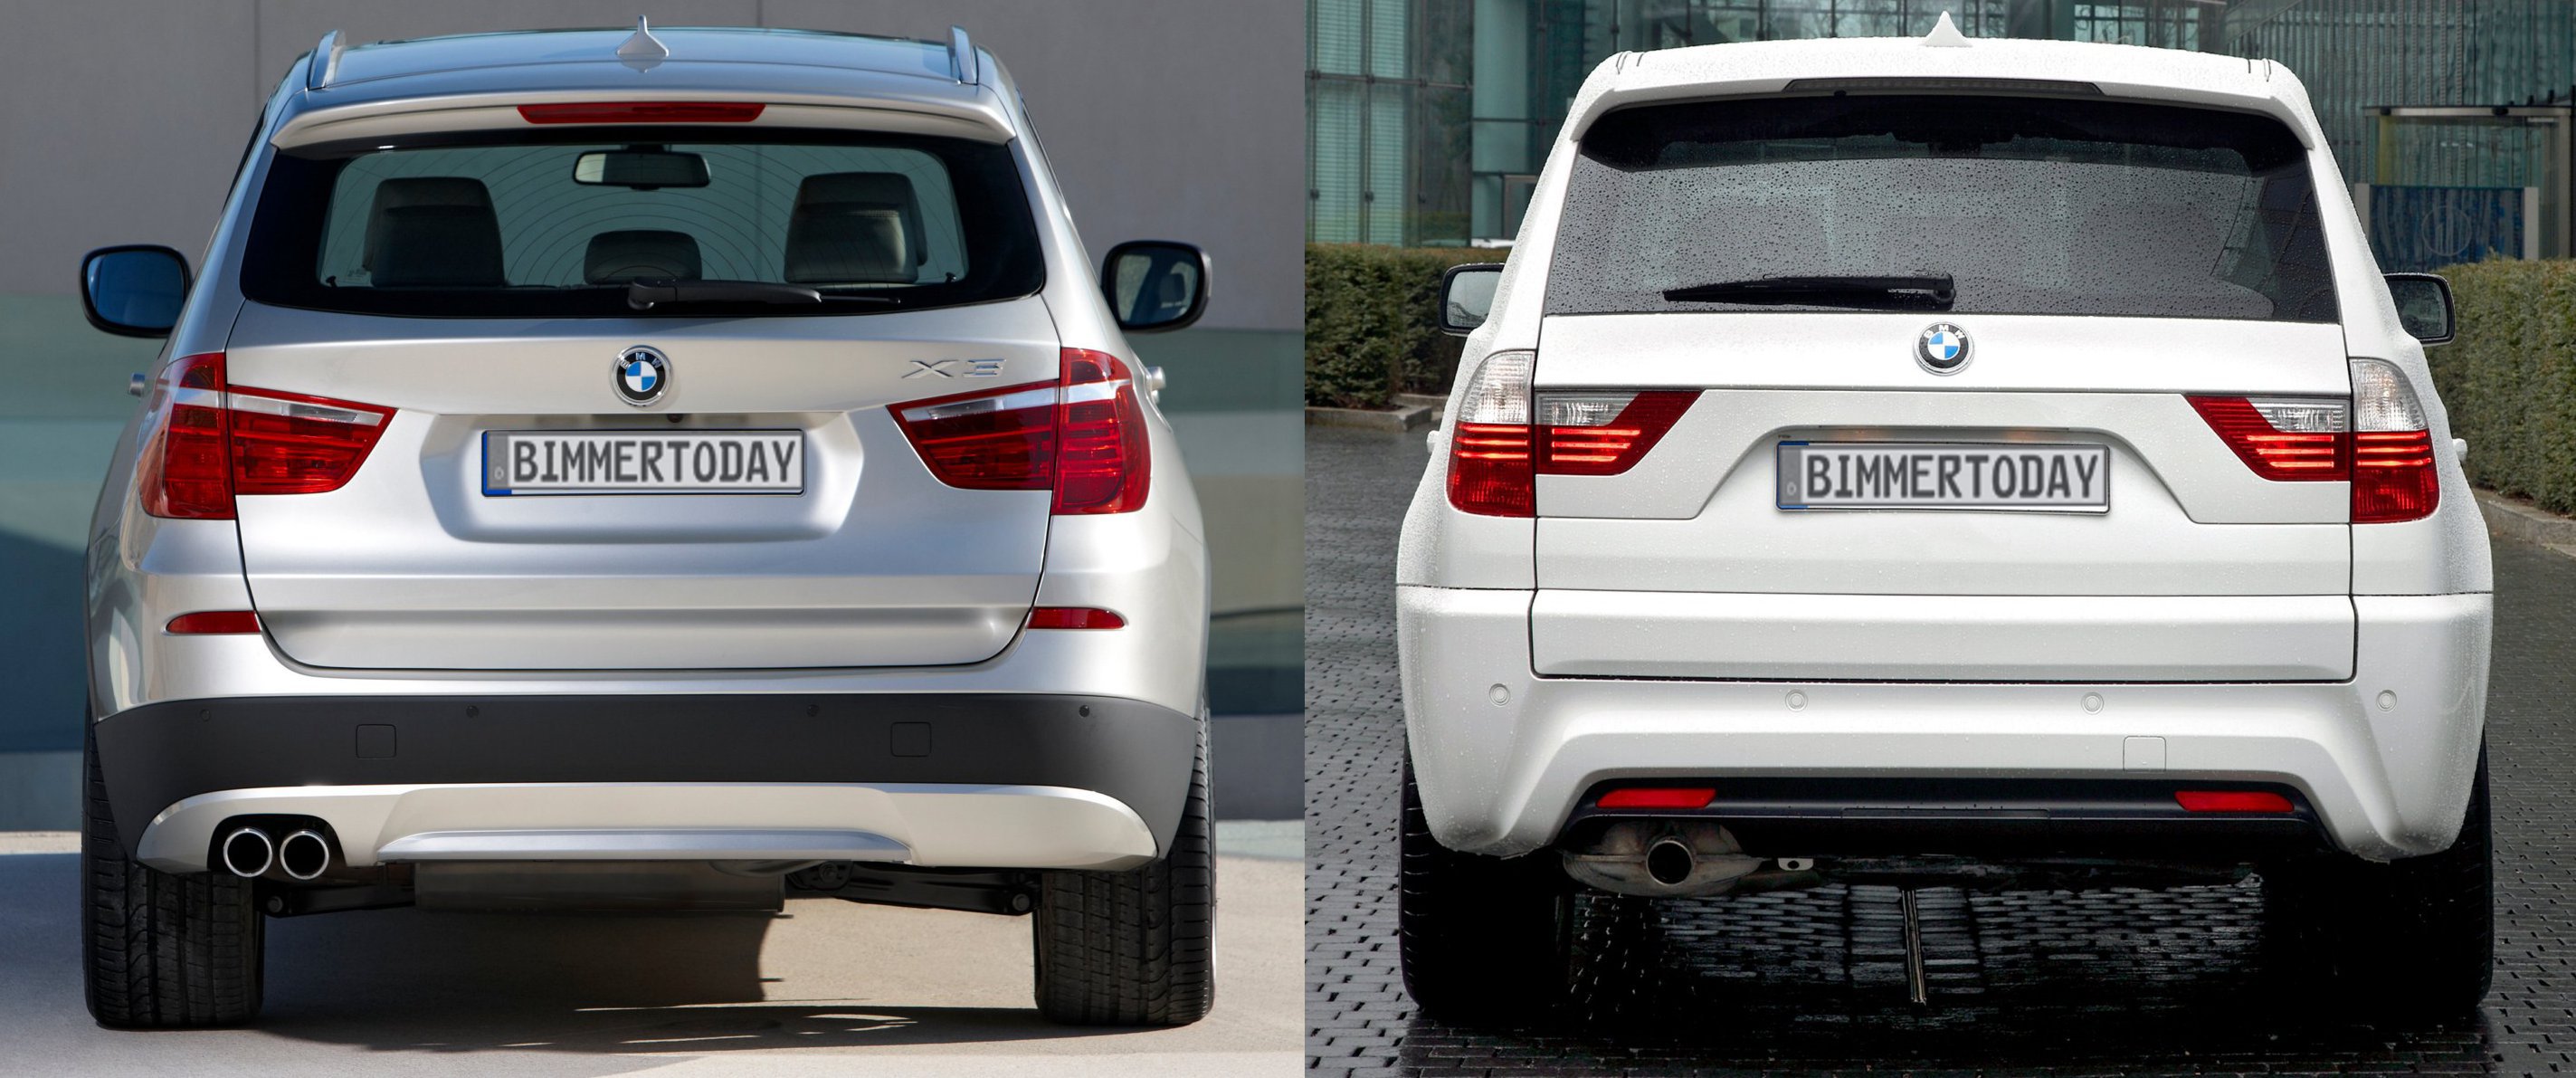 BMW-X3-F25-vs-X3-E83-Heck. Inside, in our opinion, the interior design has